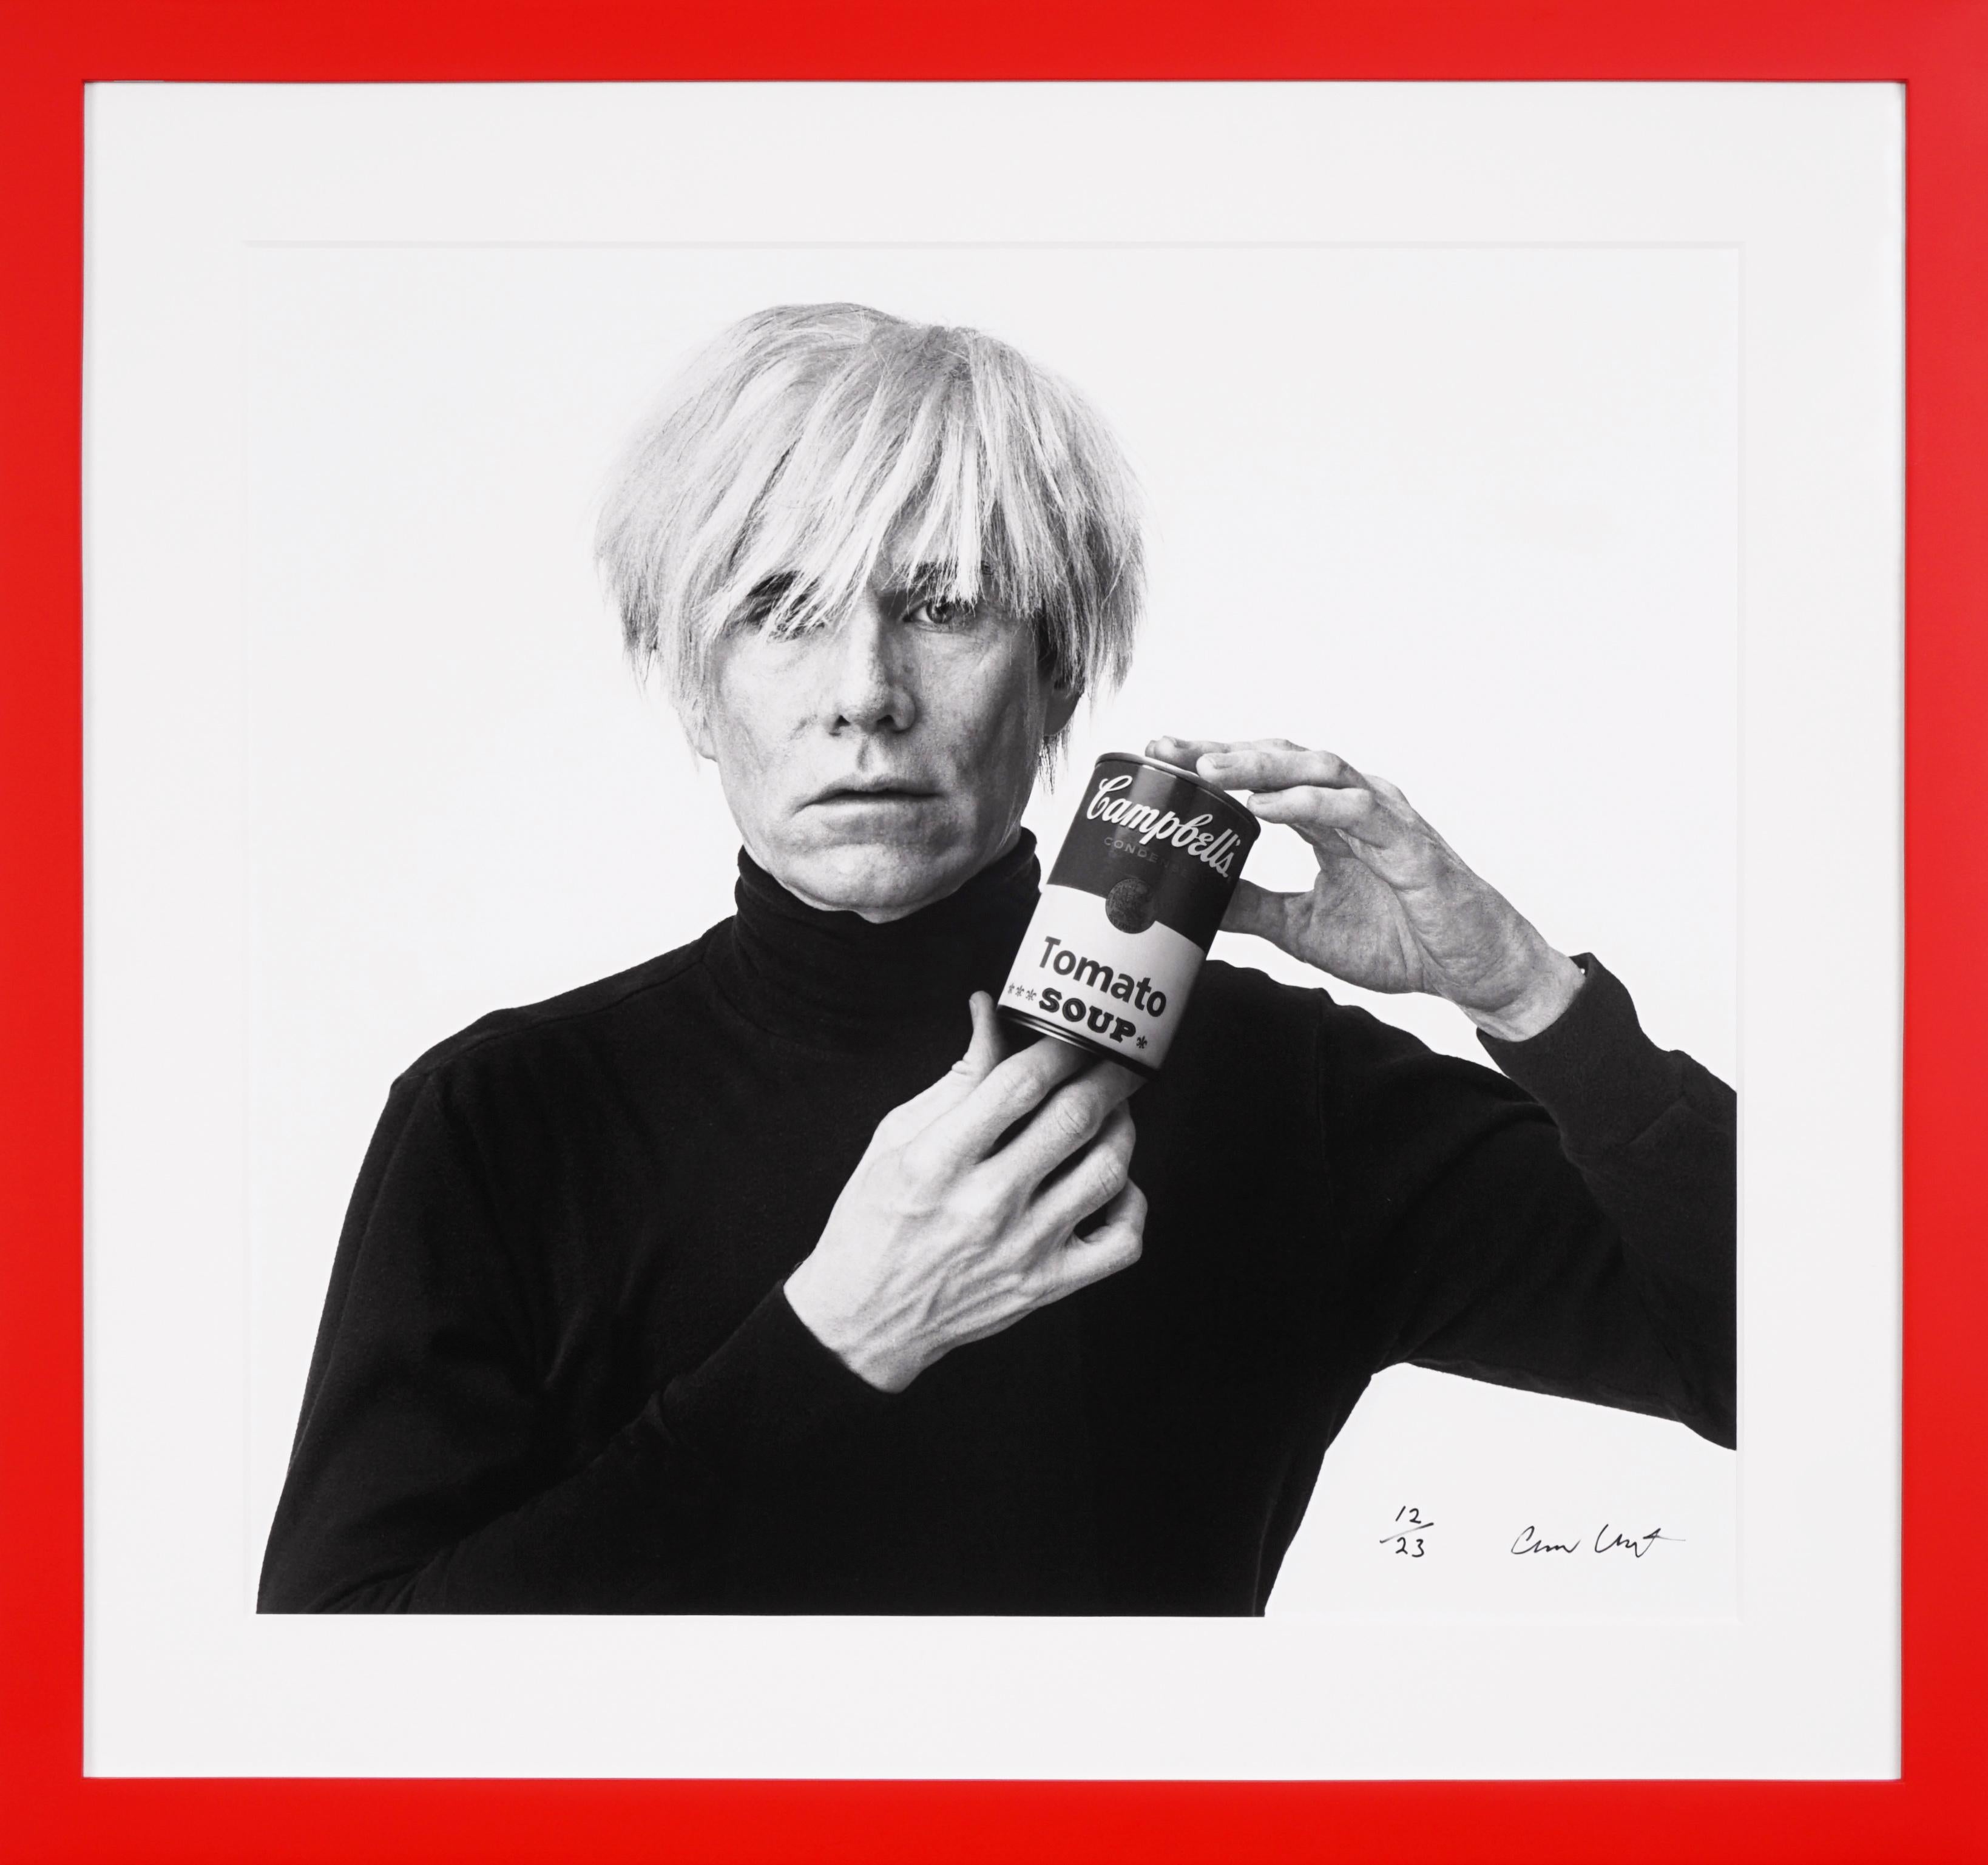 The archival photographic pop-art print, ‘Andy Warhol with Red Campbell’s Soup' is an edition of 23 and was created in 1985 by photographer Andrew Unangst. Taken in New York City, Unangst had the opportunity to meet and photograph Andy Warhol for a